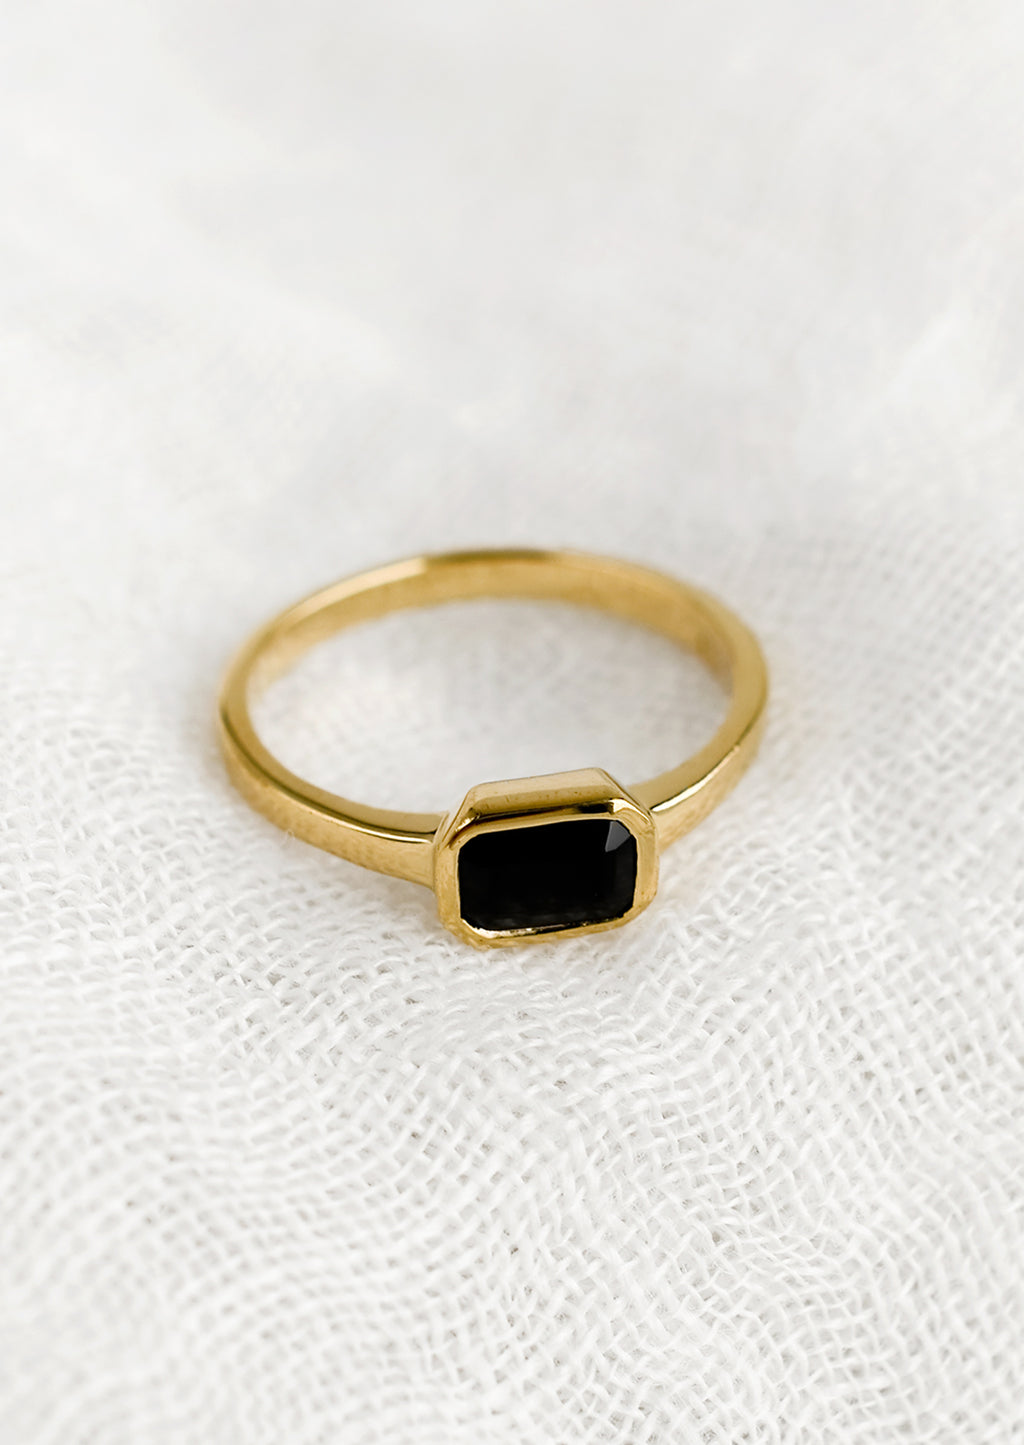 Size 6 / Onyx: An emerald cut gold ring with onyx stone.